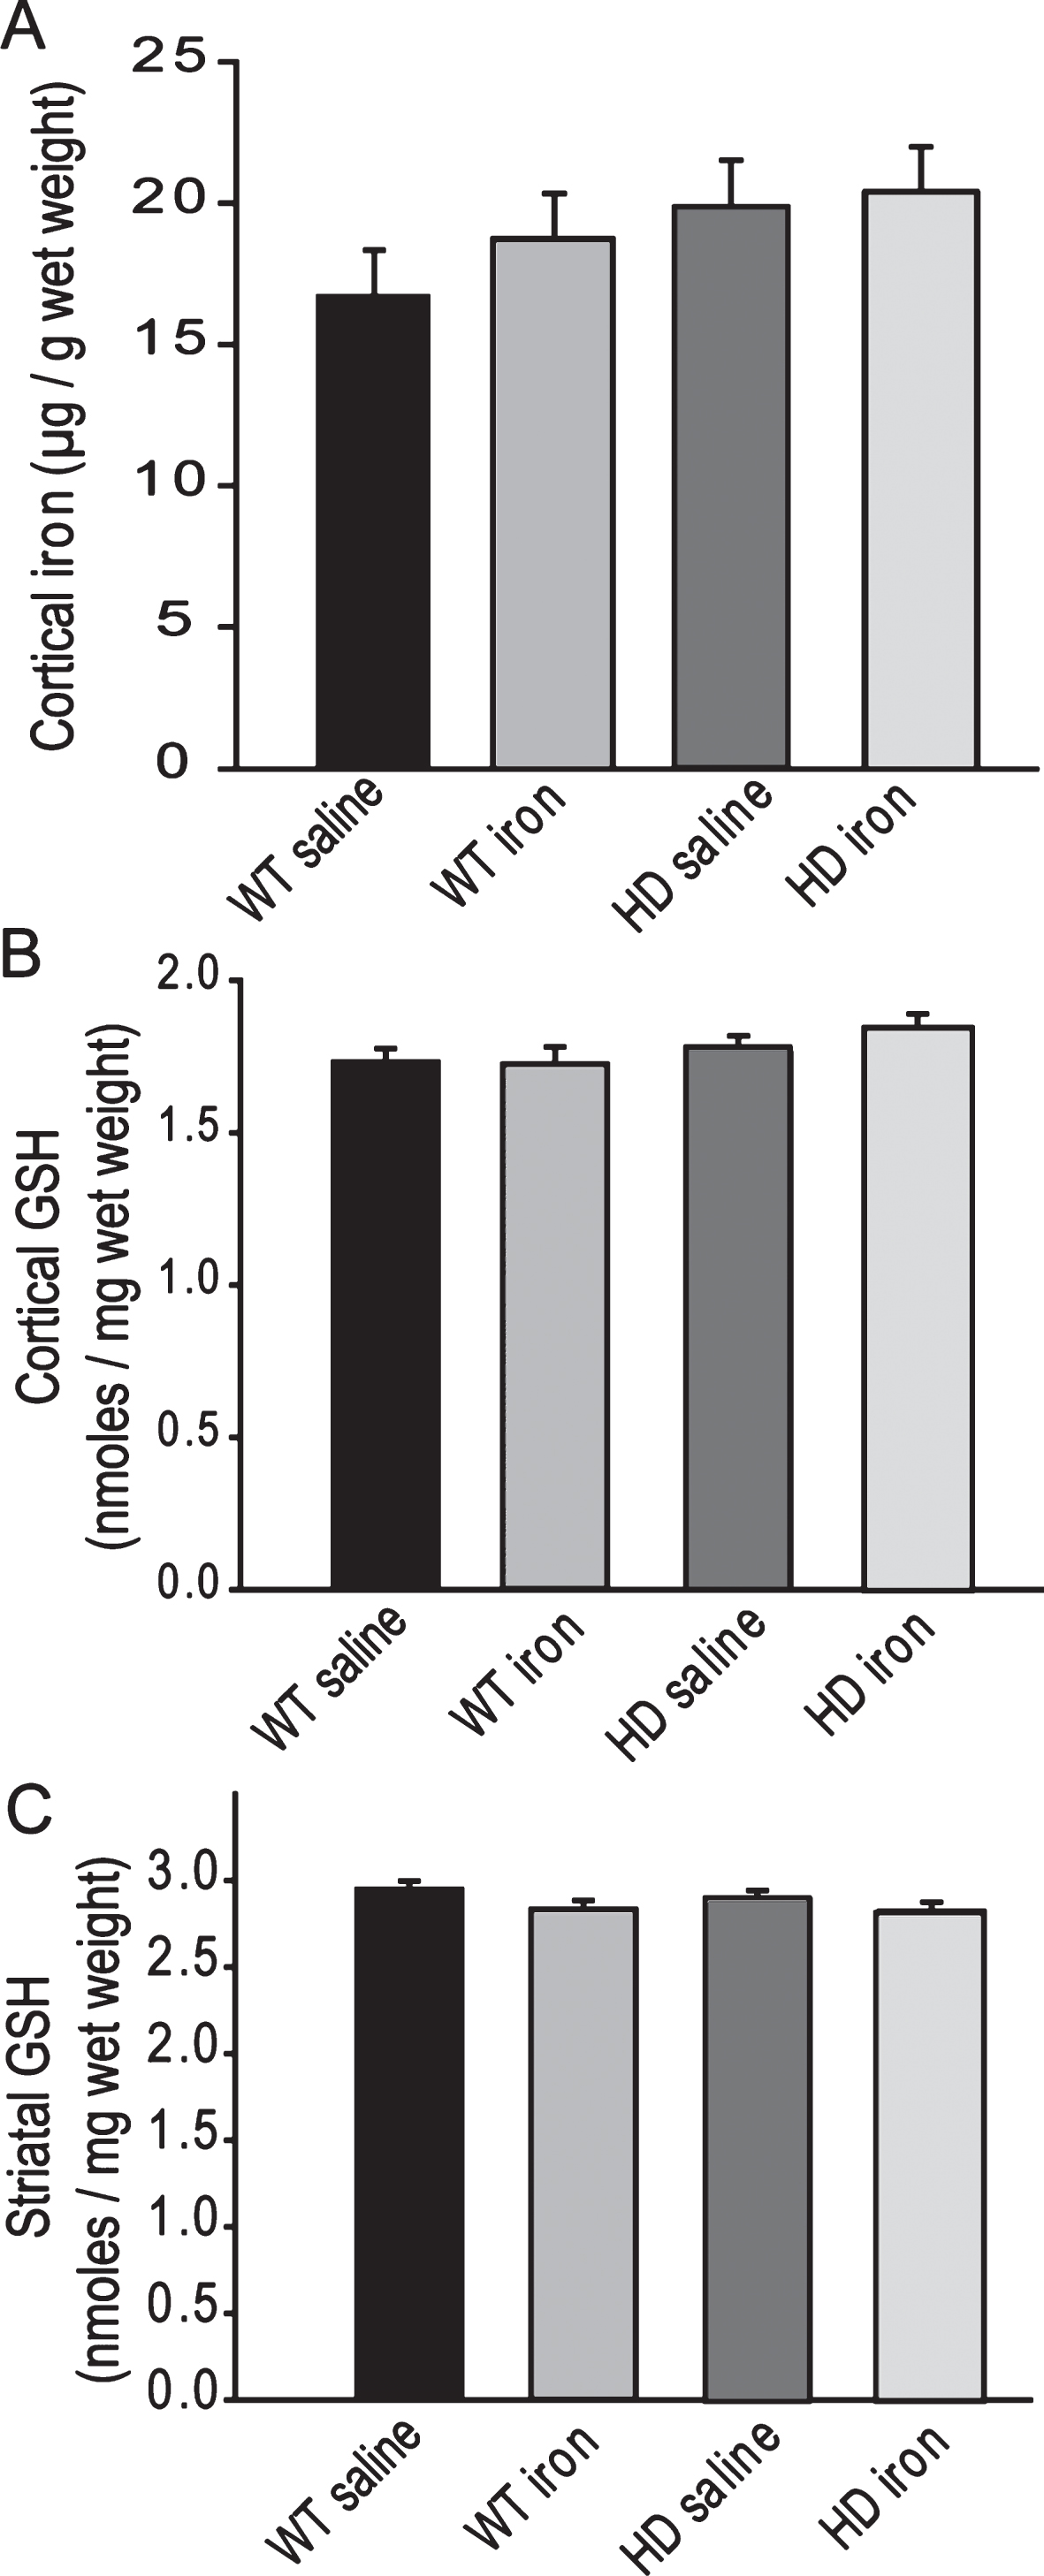 Neonatal iron supplementation does not alter brain iron or glutathione. Mice were supplemented at 10–17 days and sacrificed at 1-year of age. A. Cerebro-cortical iron is not altered by HD or the presence of neonatal iron supplementation. n = 6–7, B-C. Glutathione levels in cerebral cortex (B) and striatum (C) are not altered by HD or neonatal iron supplementation. n = 9–15 for cortex and 9–12 for striatum.